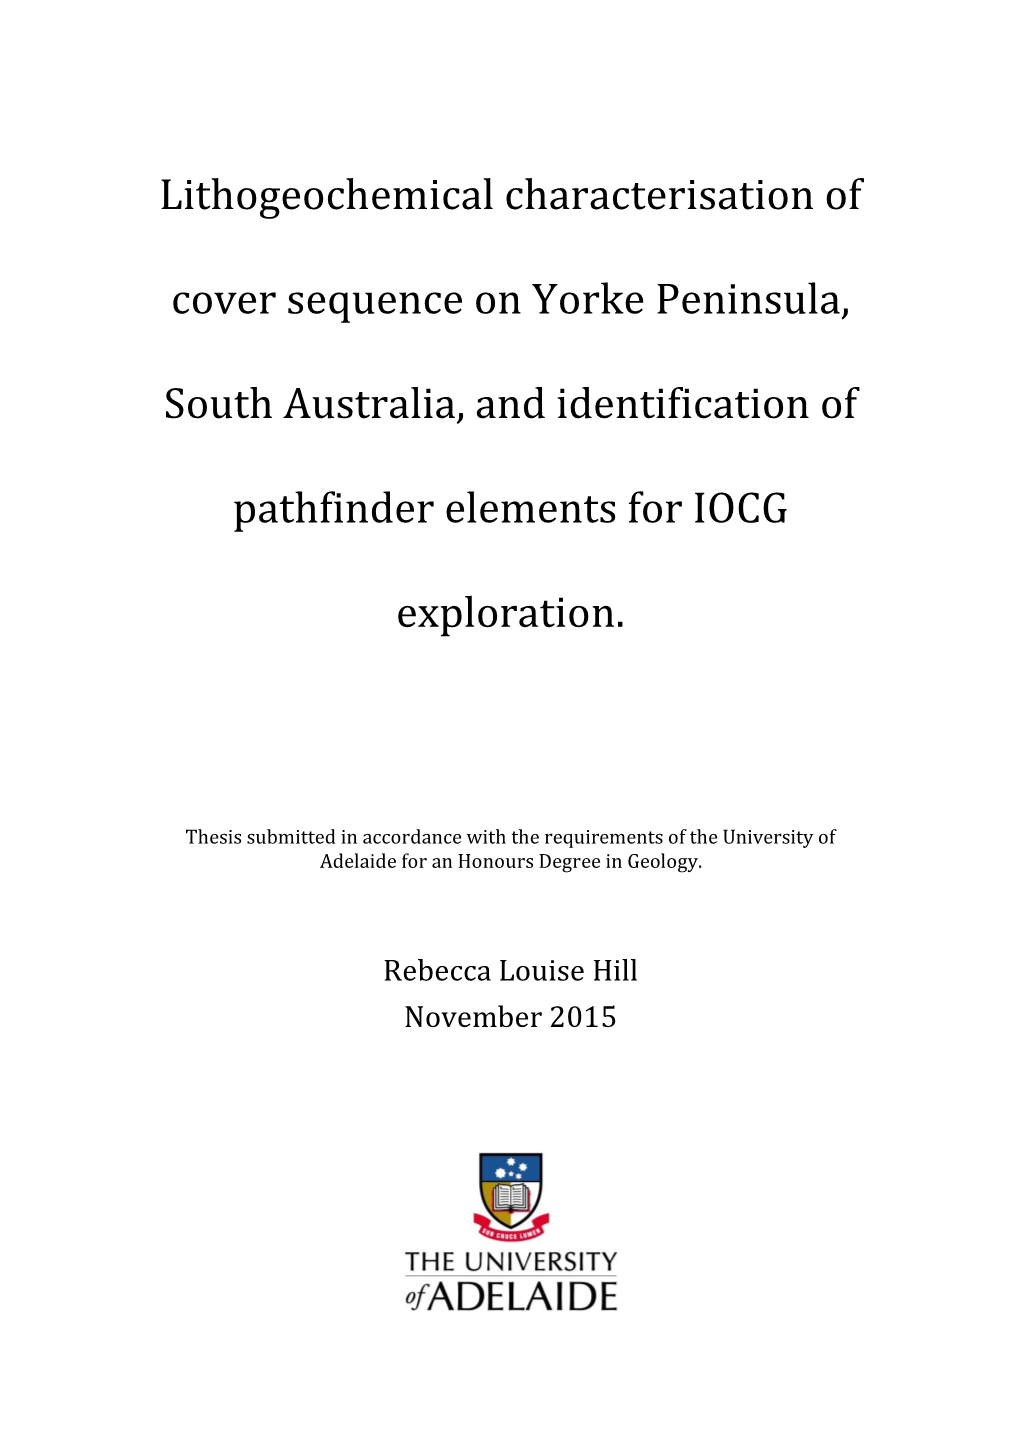 Lithogeochemical Characterisation of Cover Sequence on Yorke Peninsula